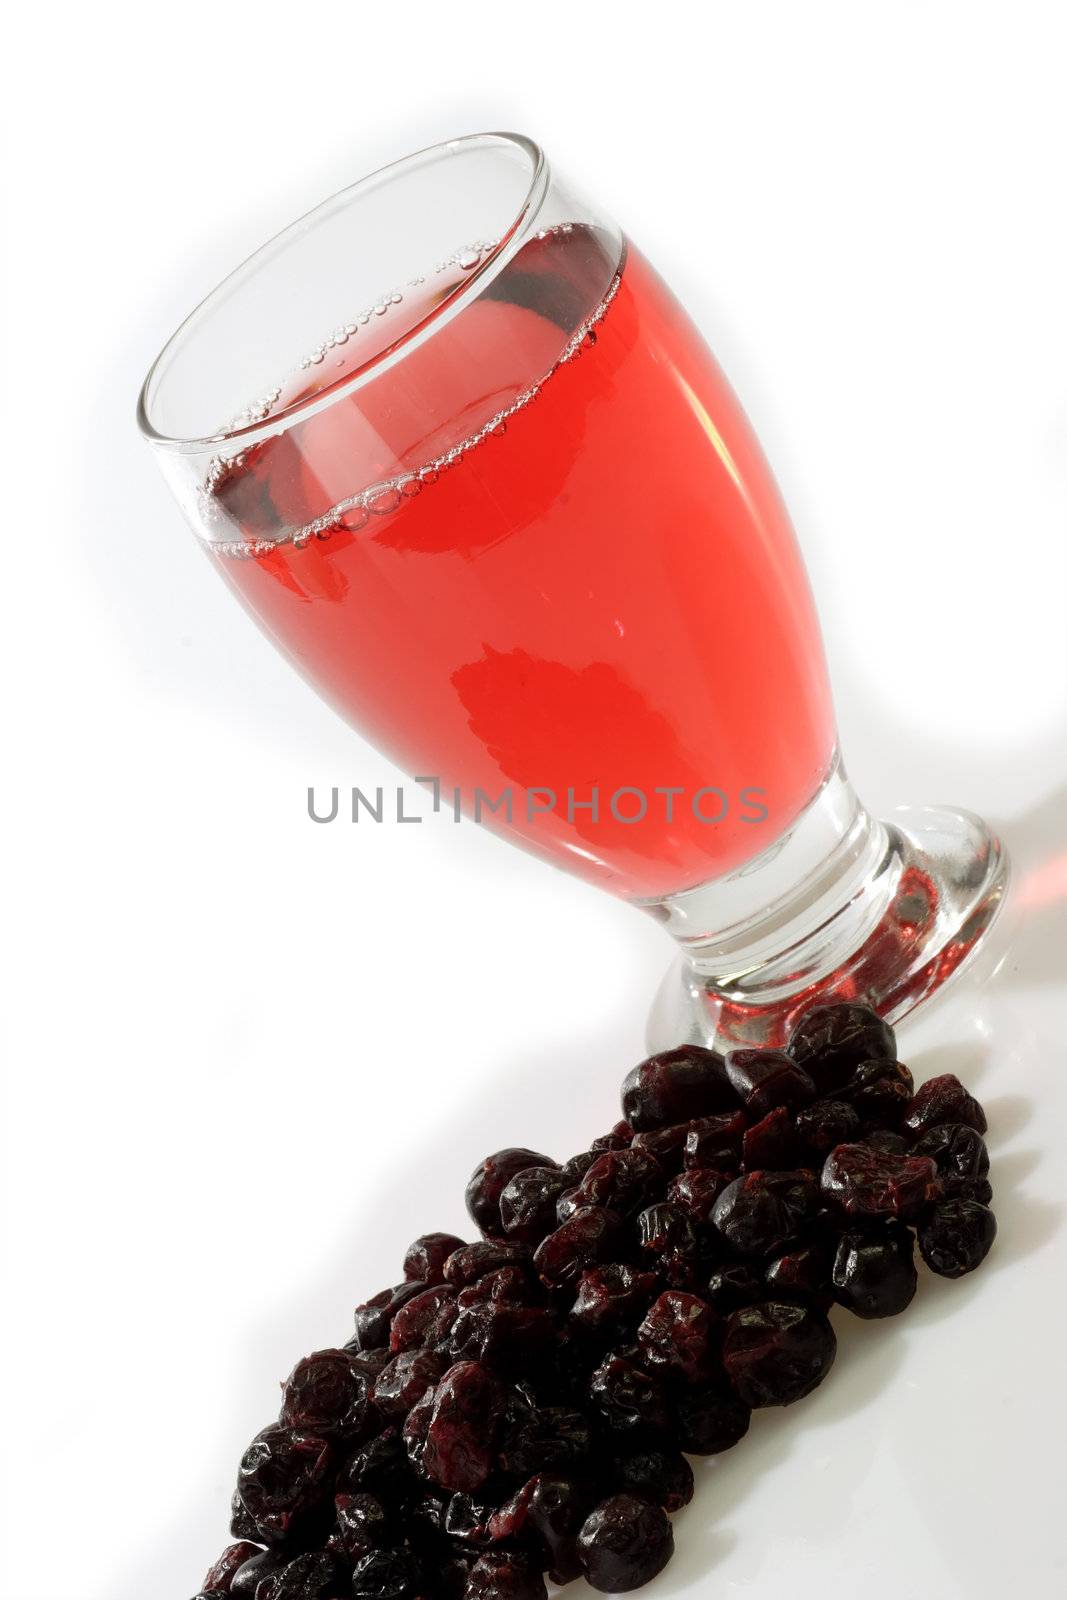 Glass of Cranberry juice on bright background